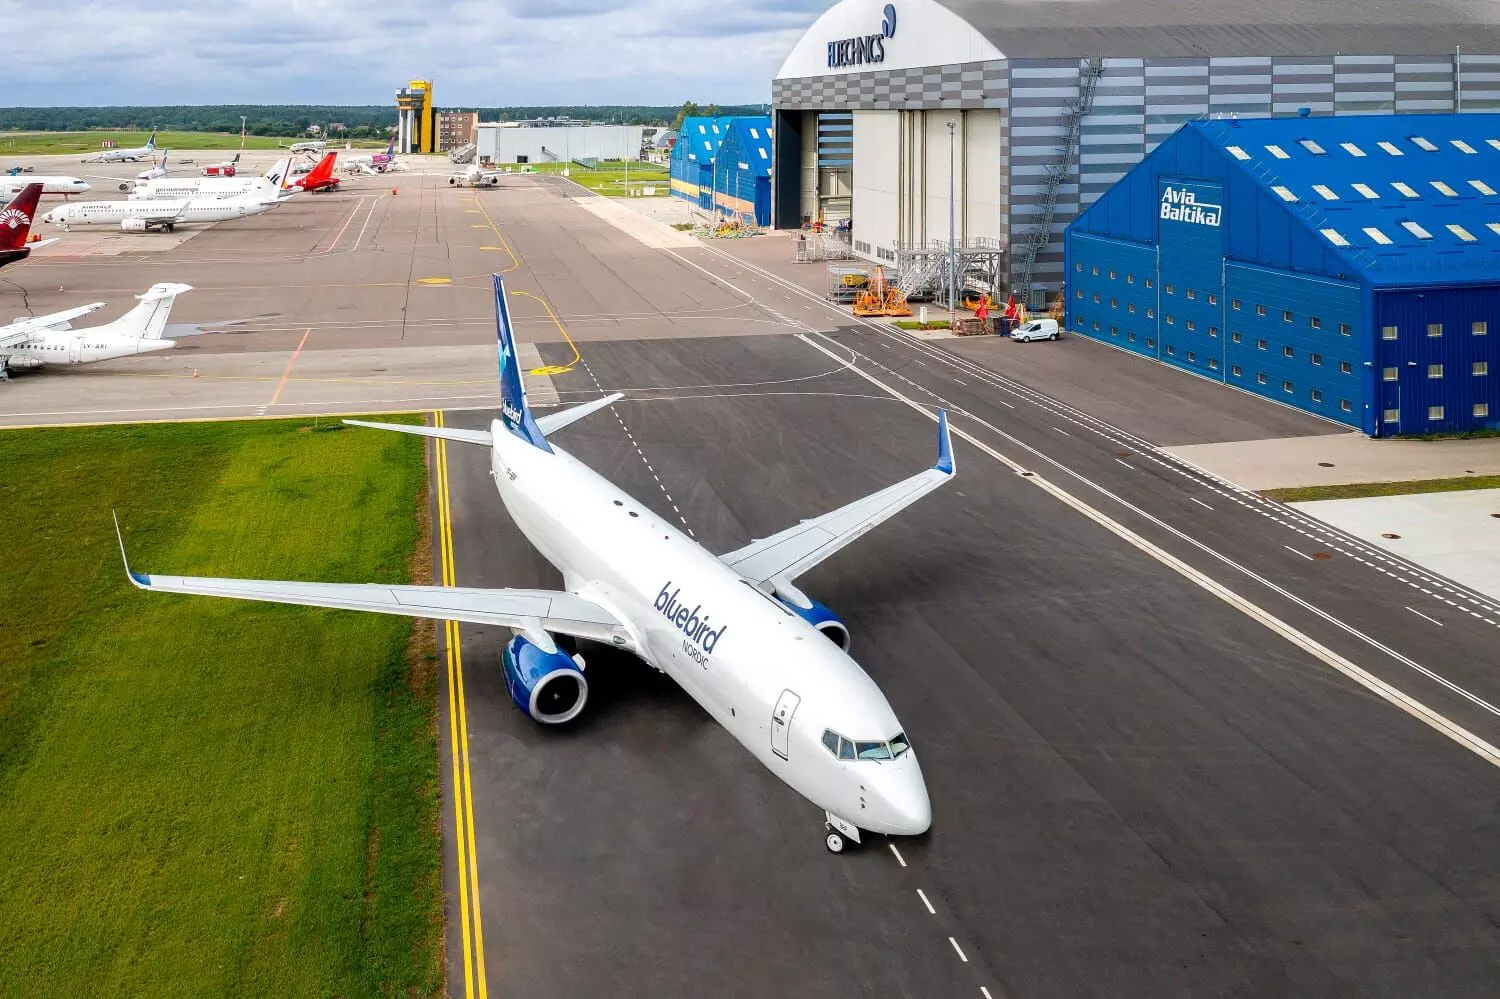 AviaAM Leasing delivers second B737-800 Boeing converted freighter